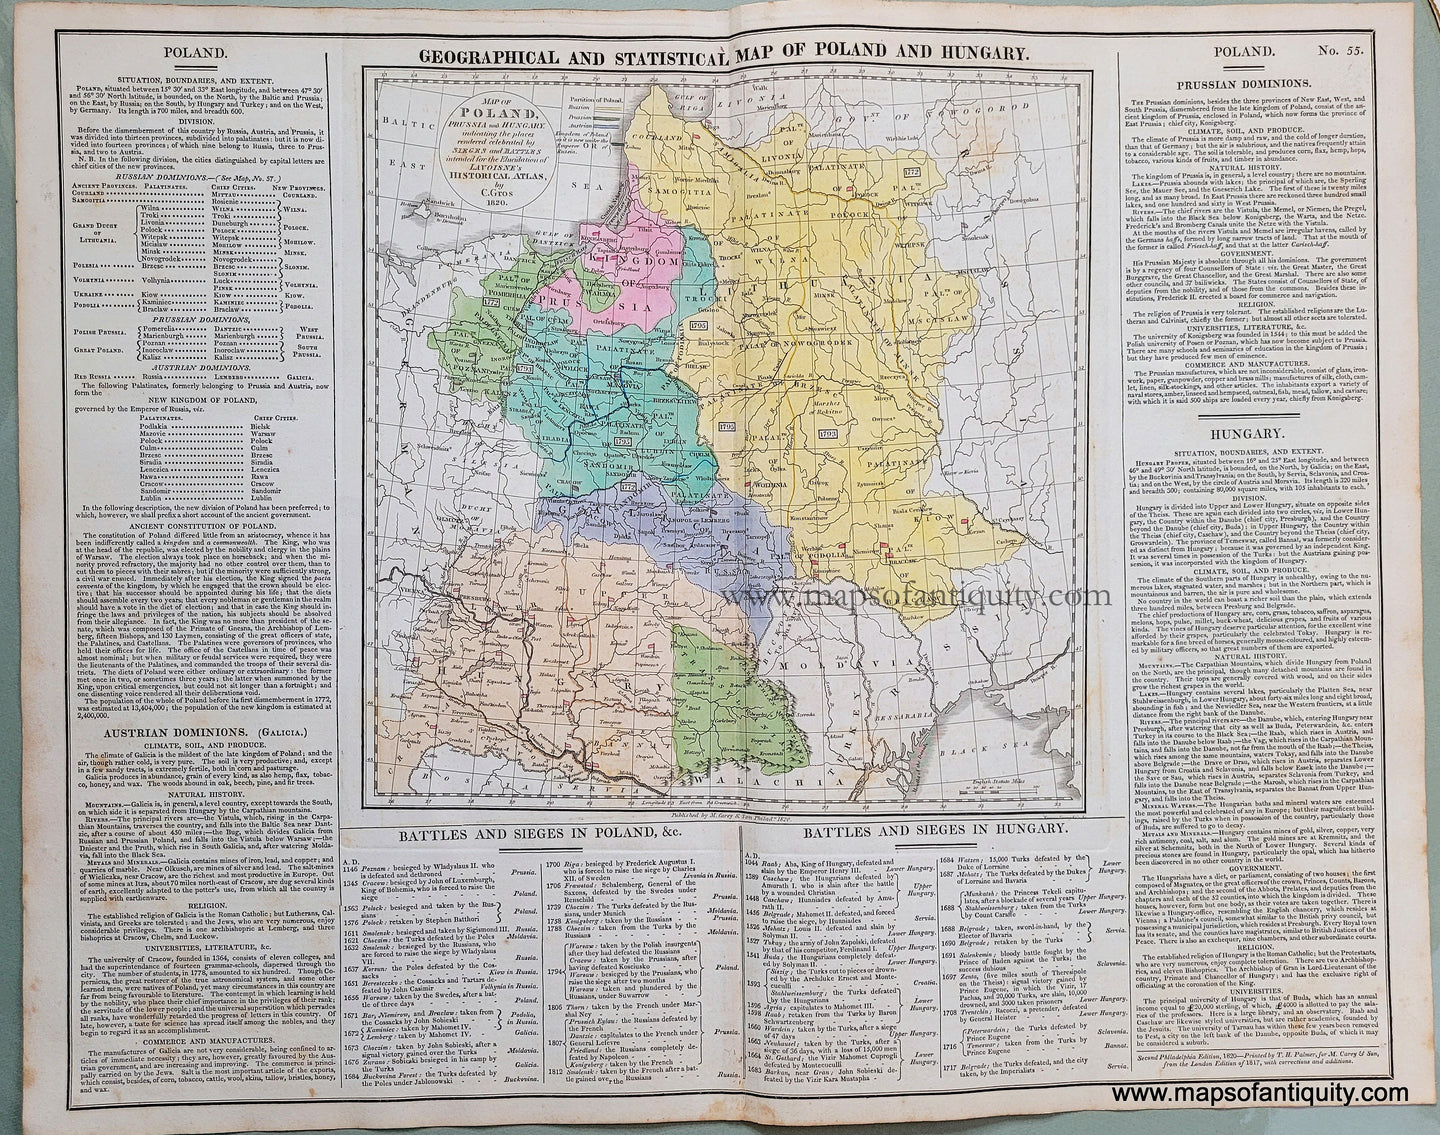 Antique-Hand-Colored-Map-Geographical-and-Historical-Map-of-Poland-and-Hungary-No.-55.-****-Europe-Poland-1820-Lavoisne-Maps-Of-Antiquity